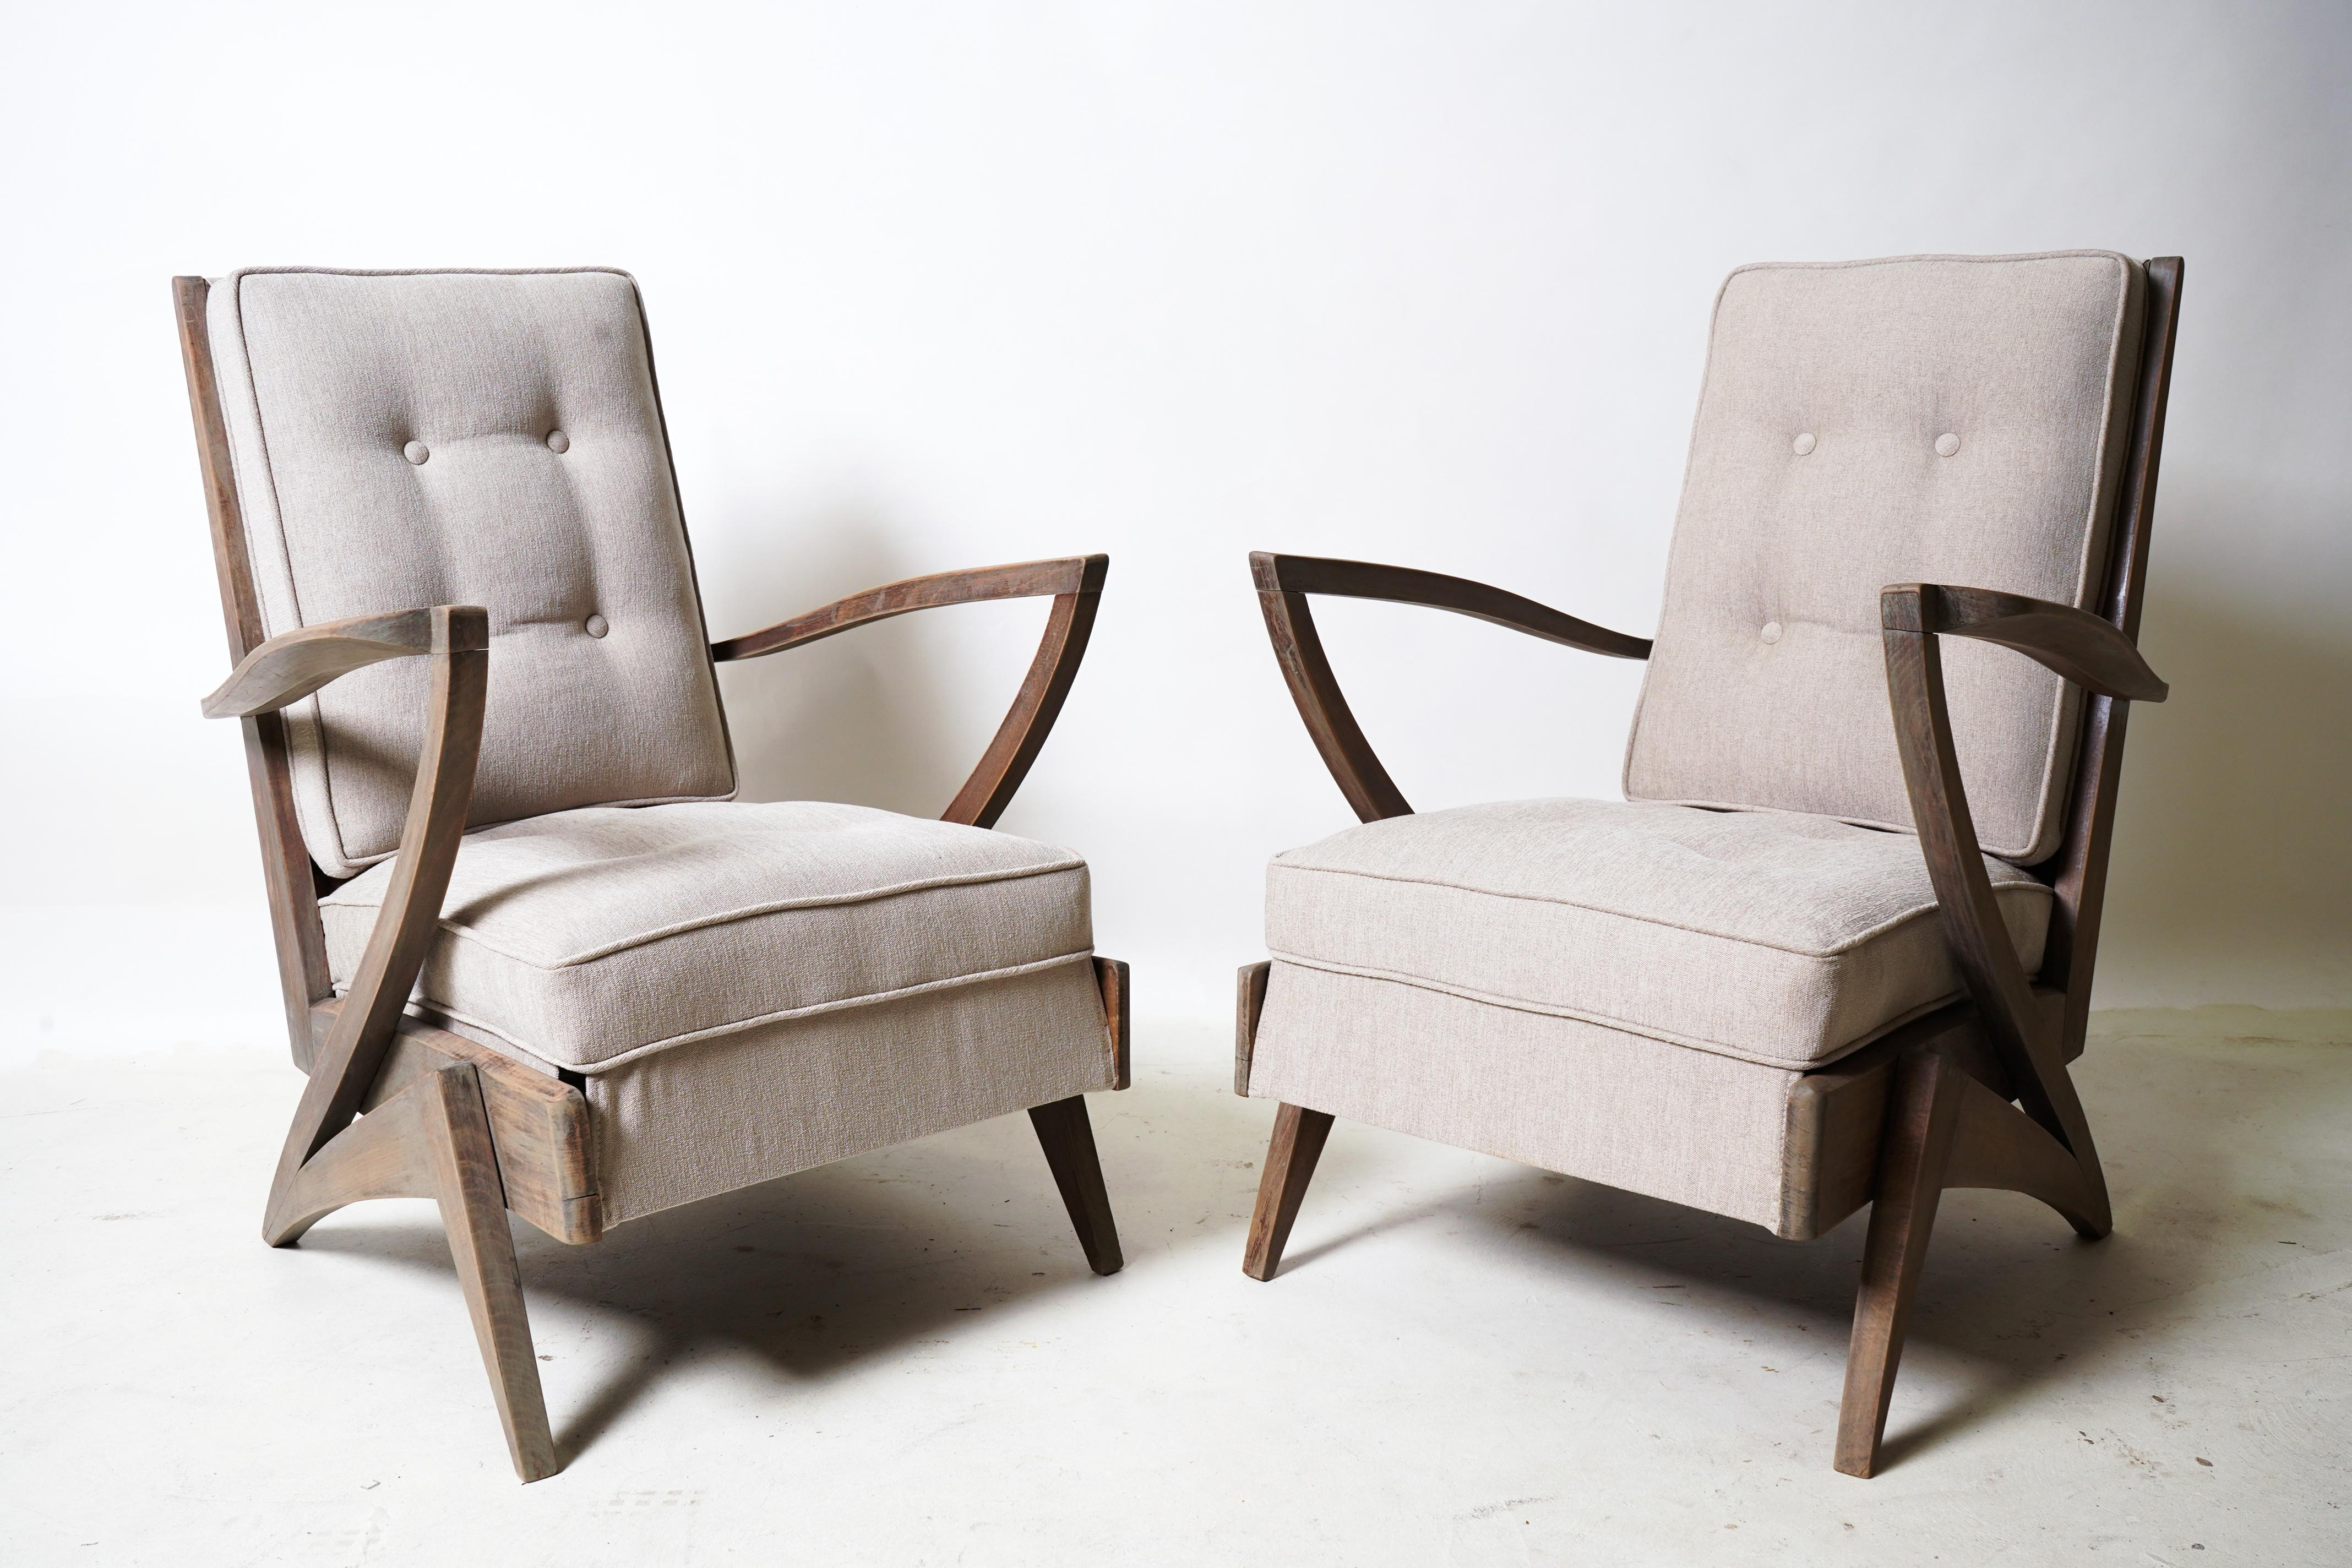 Pair of Mid-Century Modern French Lounge Chairs In Good Condition For Sale In Chicago, IL